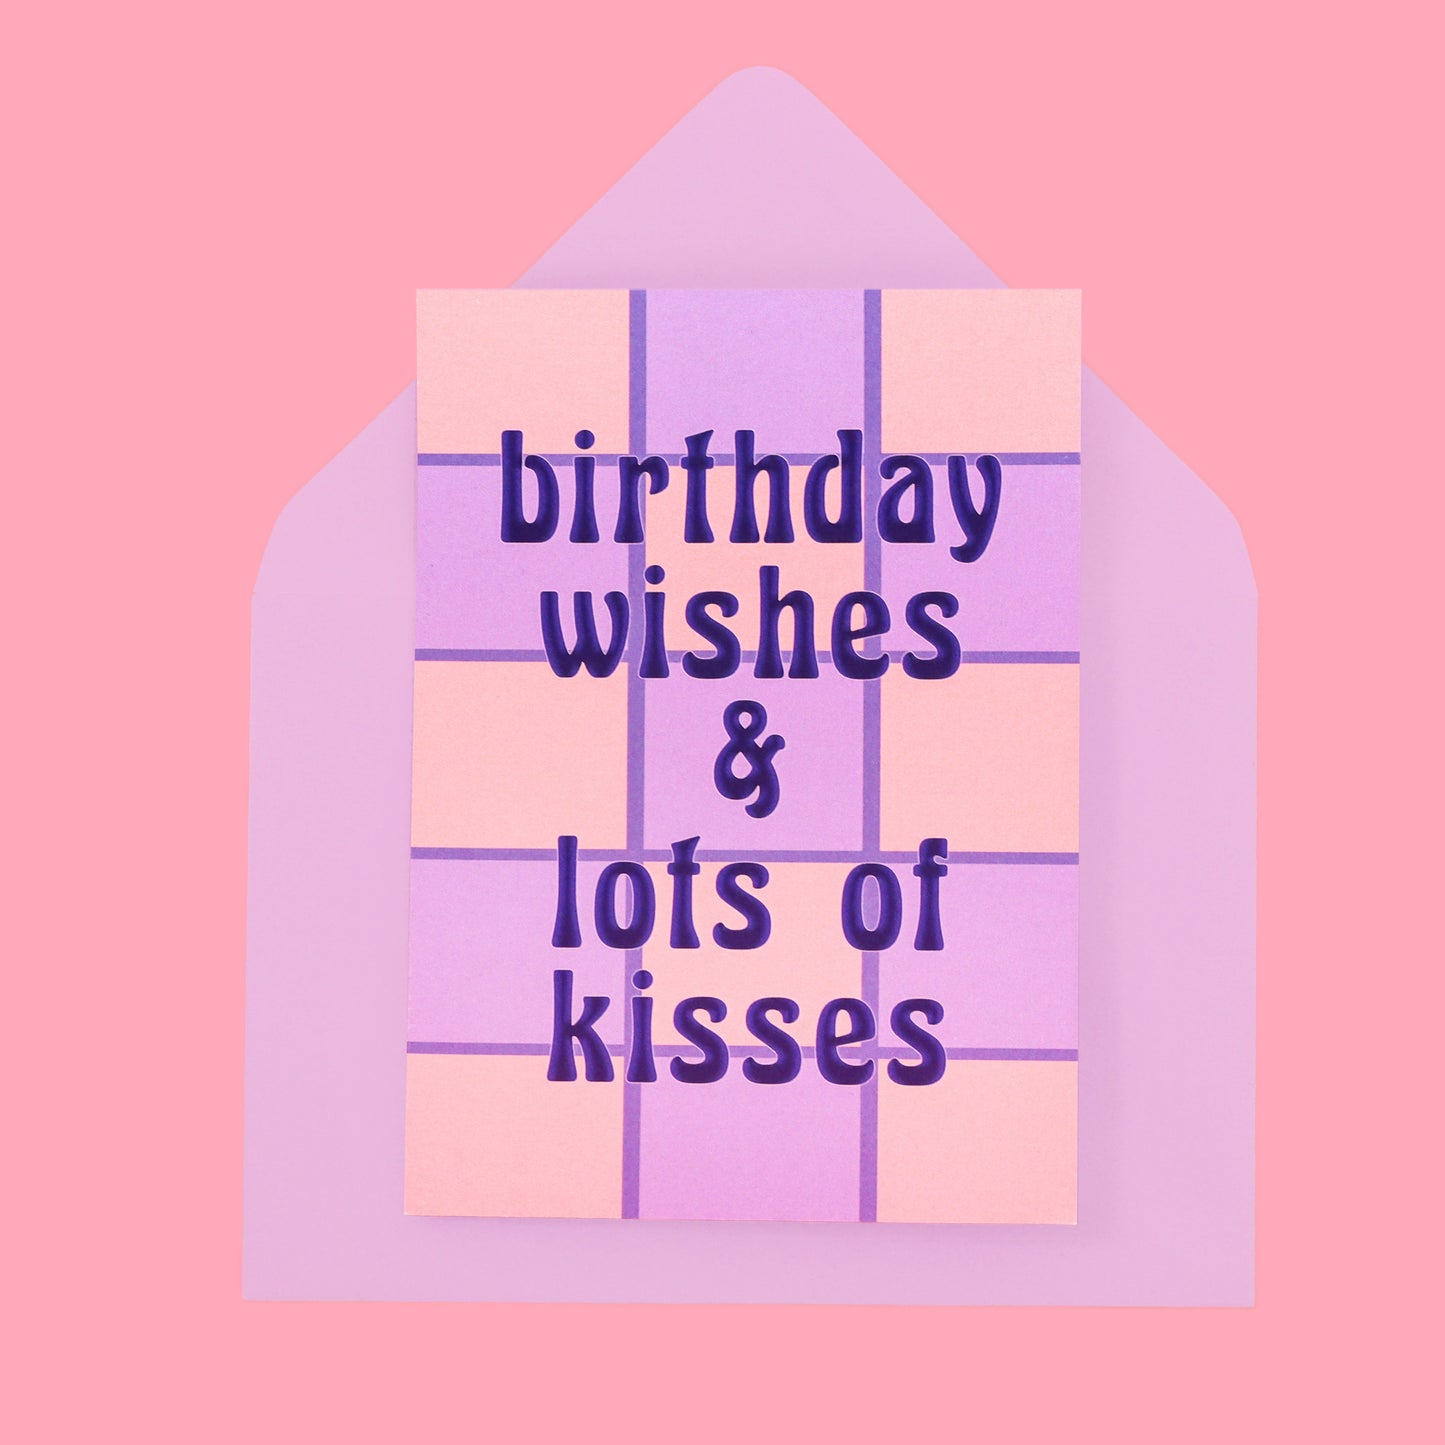 A6 Birthday Wishes & Lots of Kisses Card